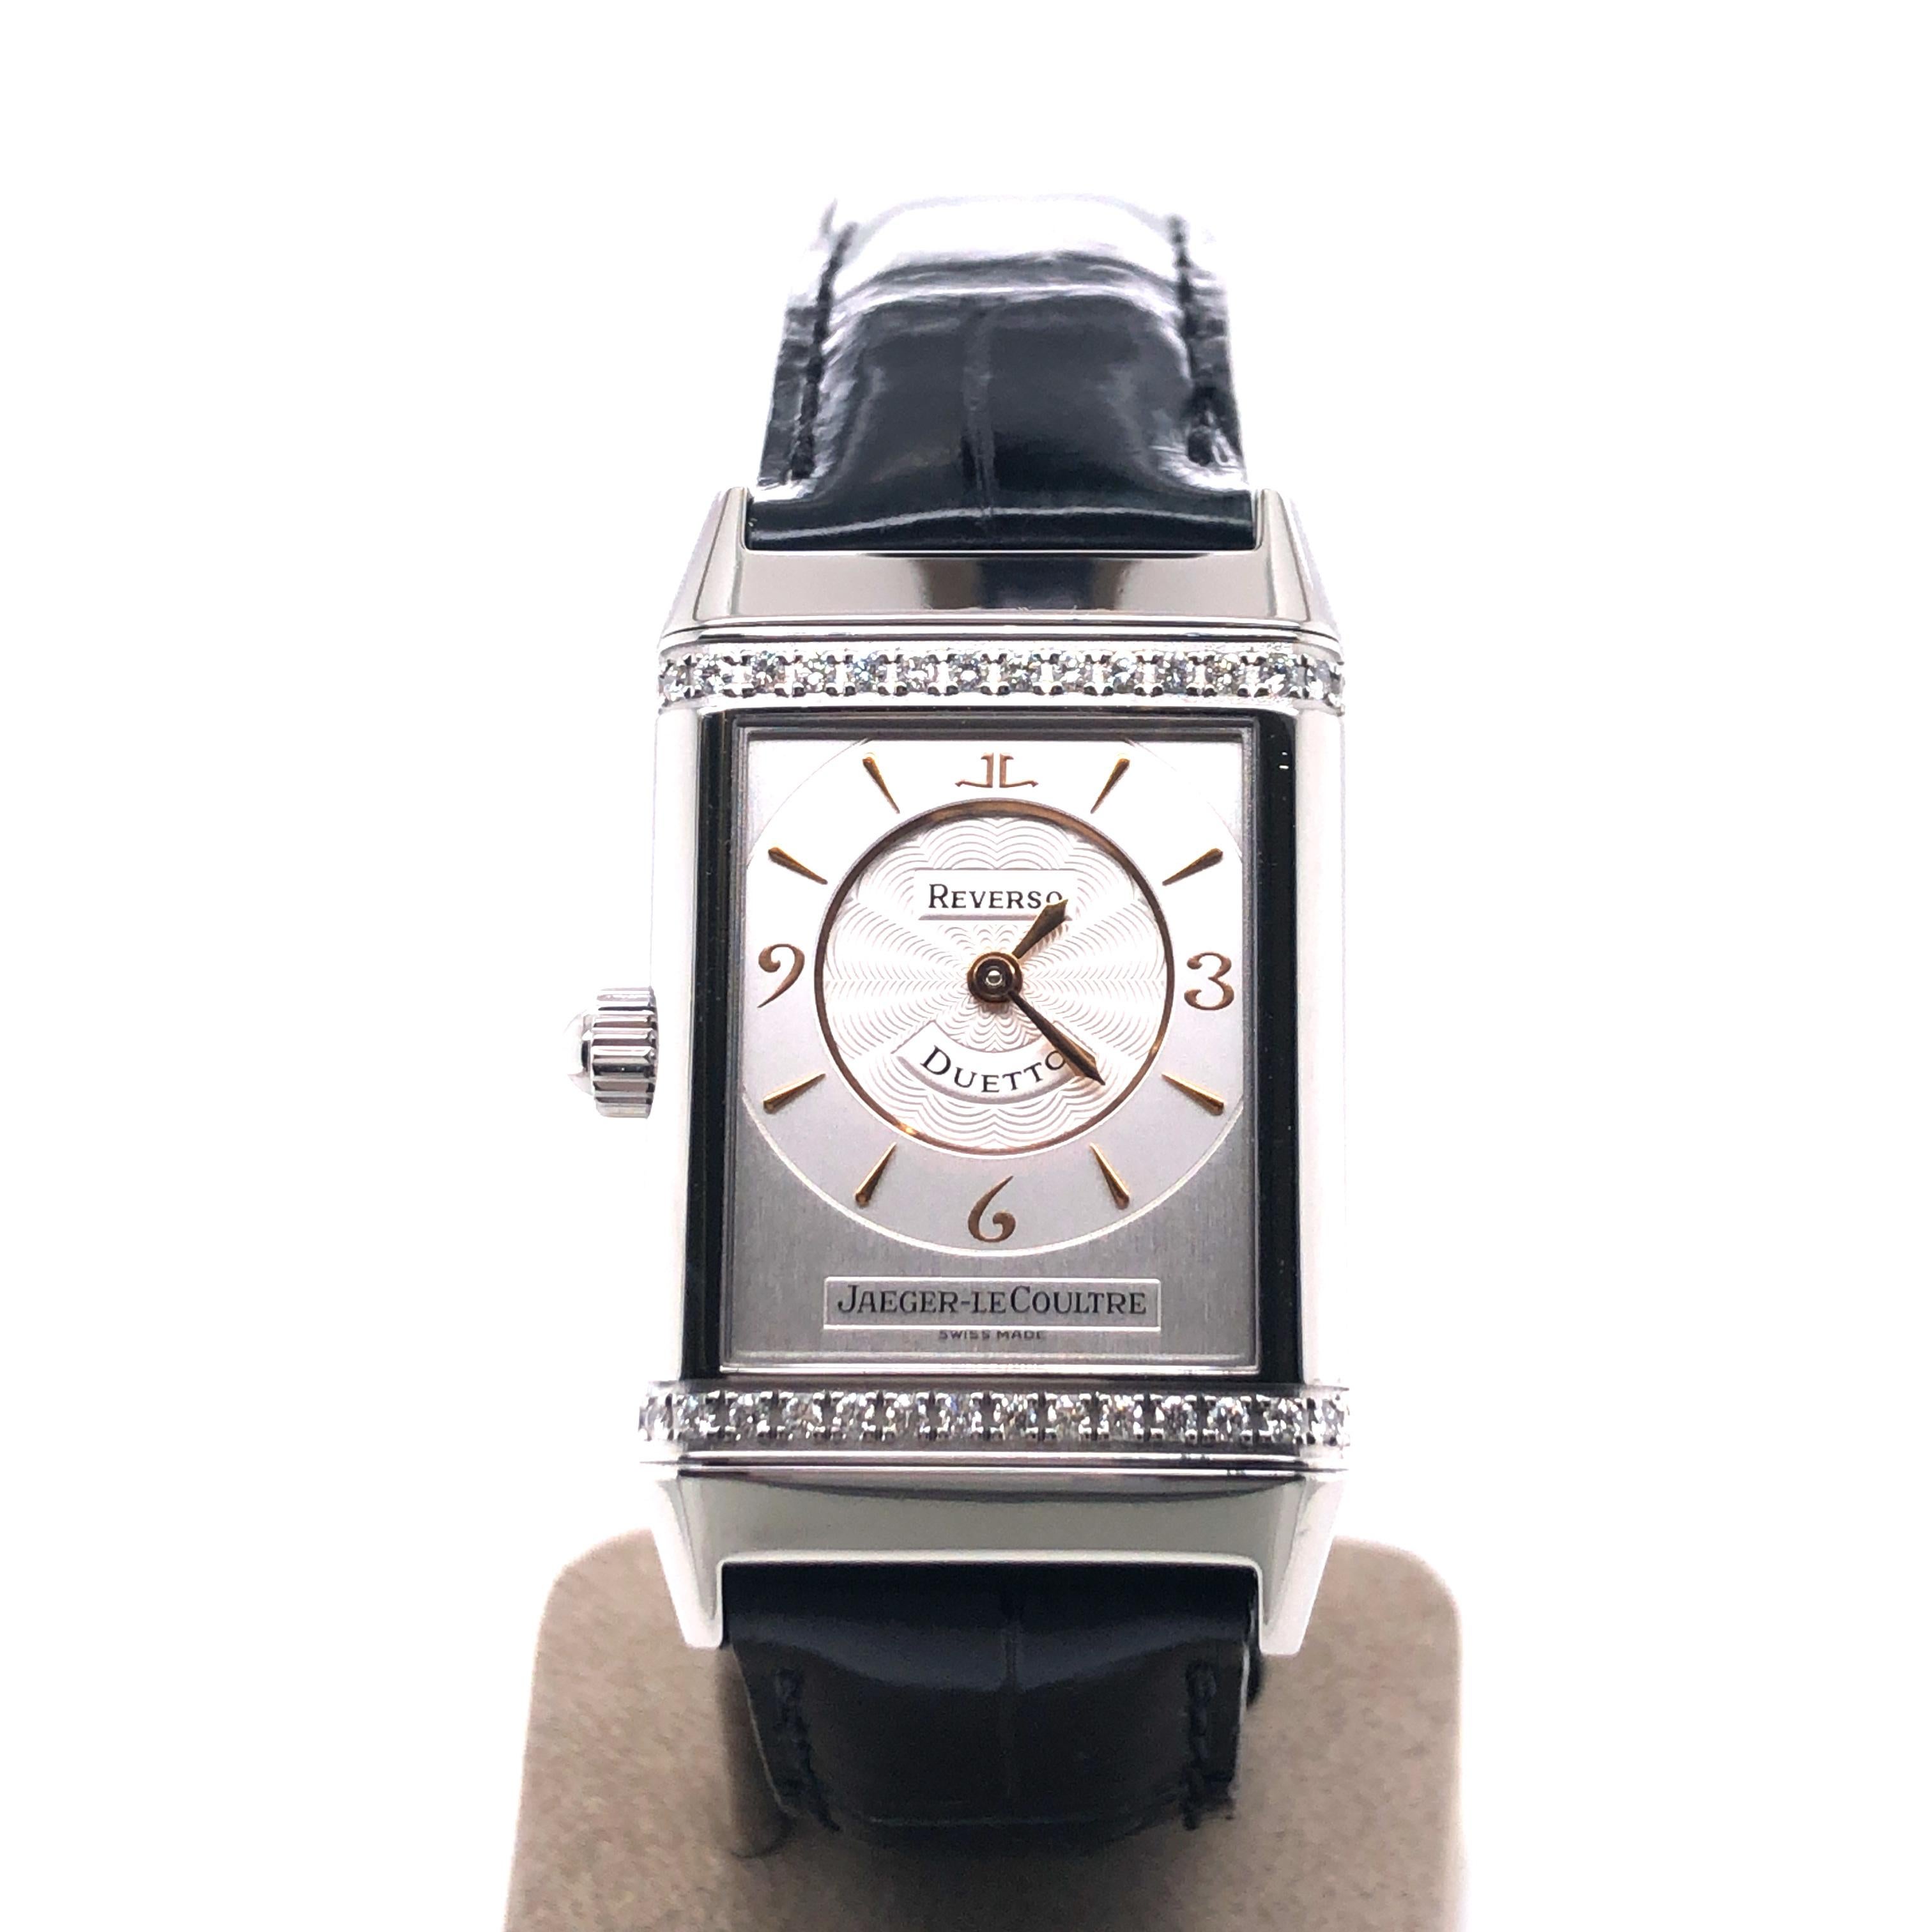 Super elegant Jaeger-LeCoultre Reverso-Duetto ladies watch ref. 256.875. Rectangular shaped case in stainless steel finished with new, black and original leather strap by JLC. The watch is secured with a double folding-clasp also in stainless steel.